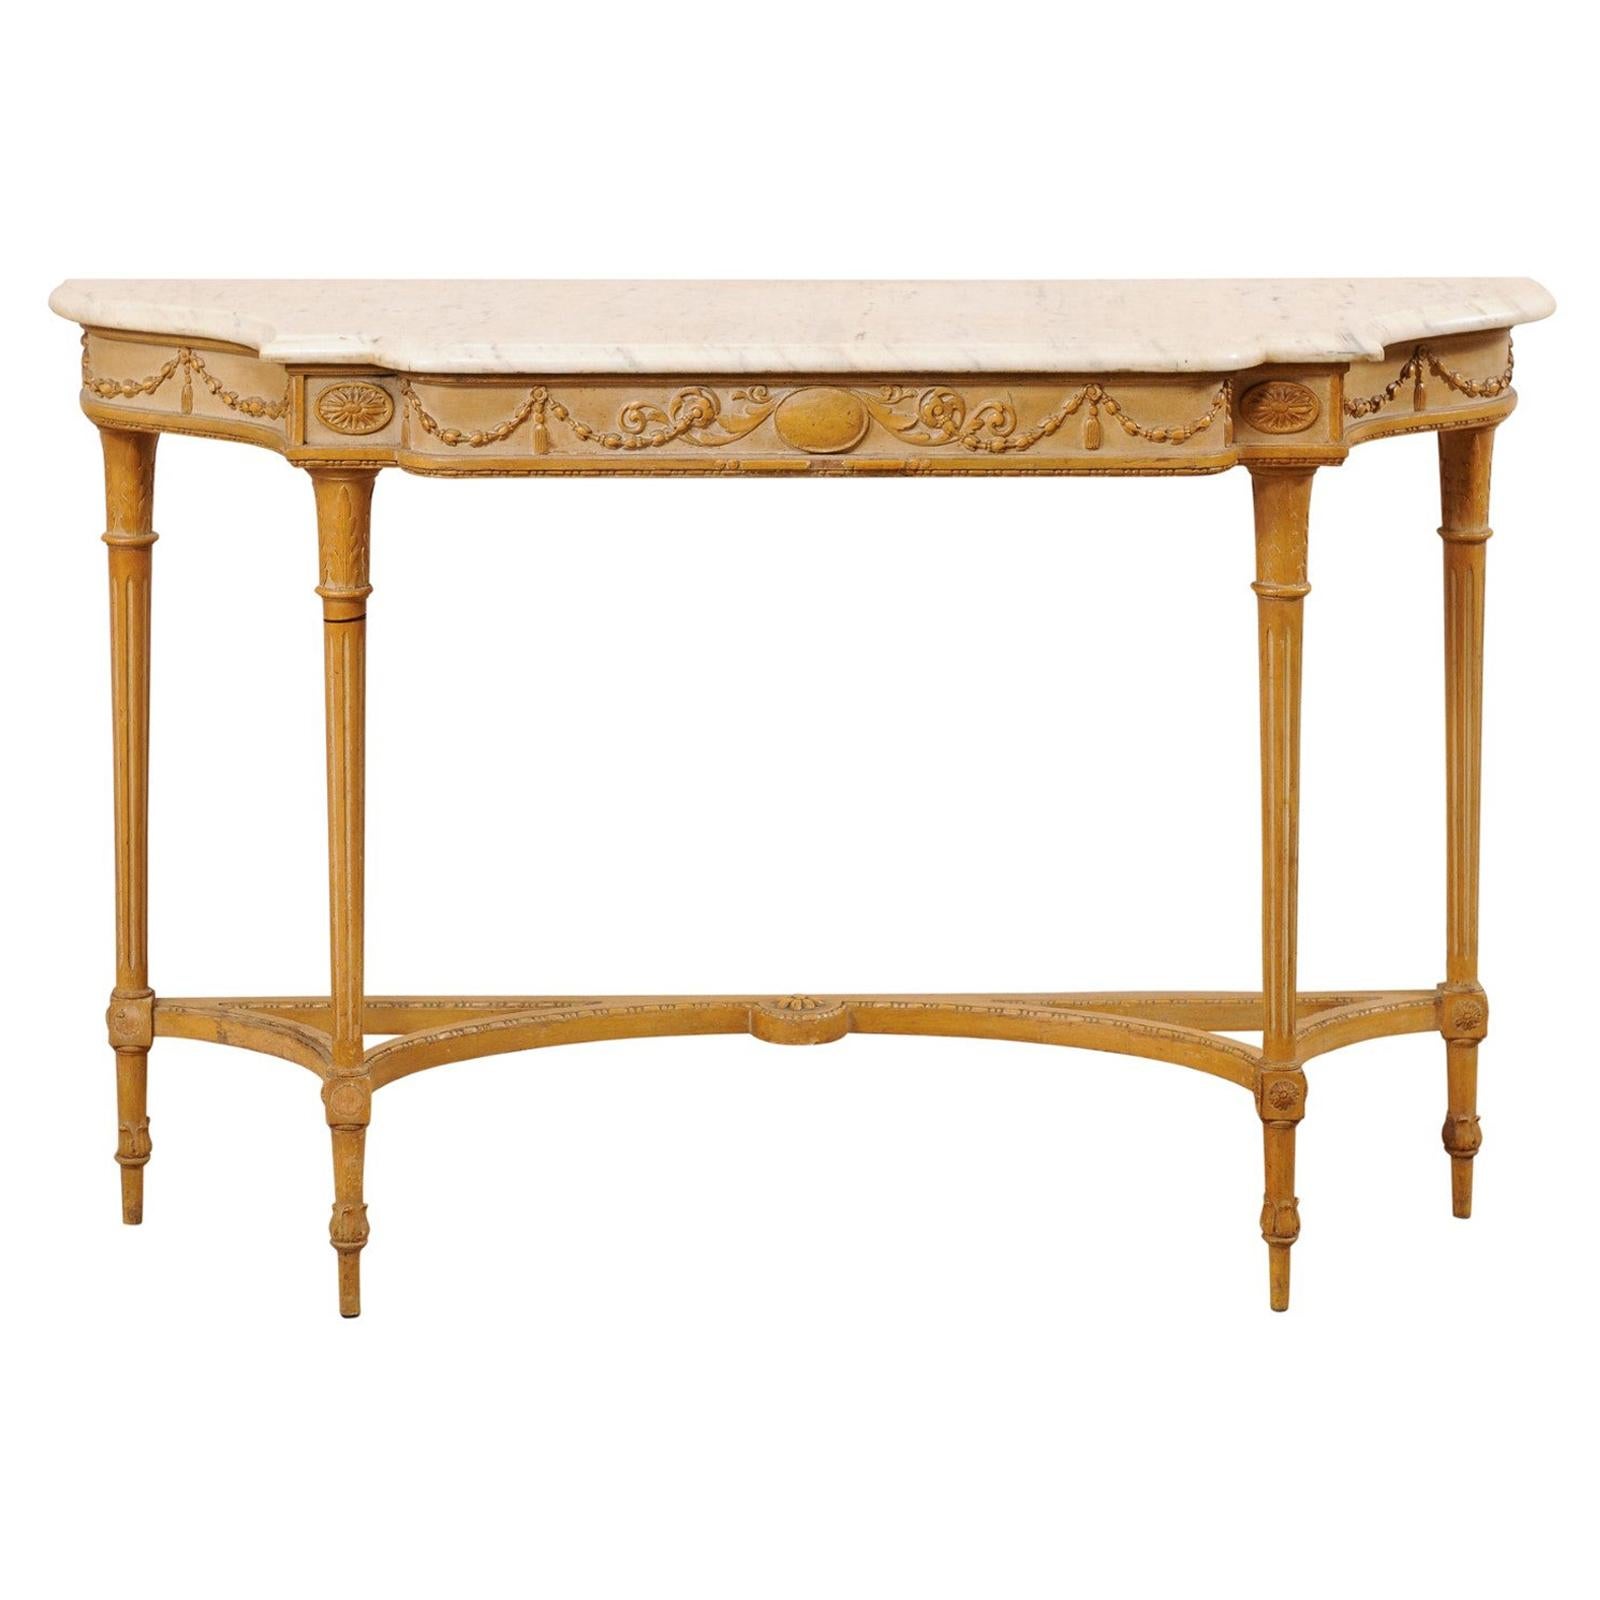 French Marble Top Console Table w/ Neoclassical Style Carvings & Fluted Legs